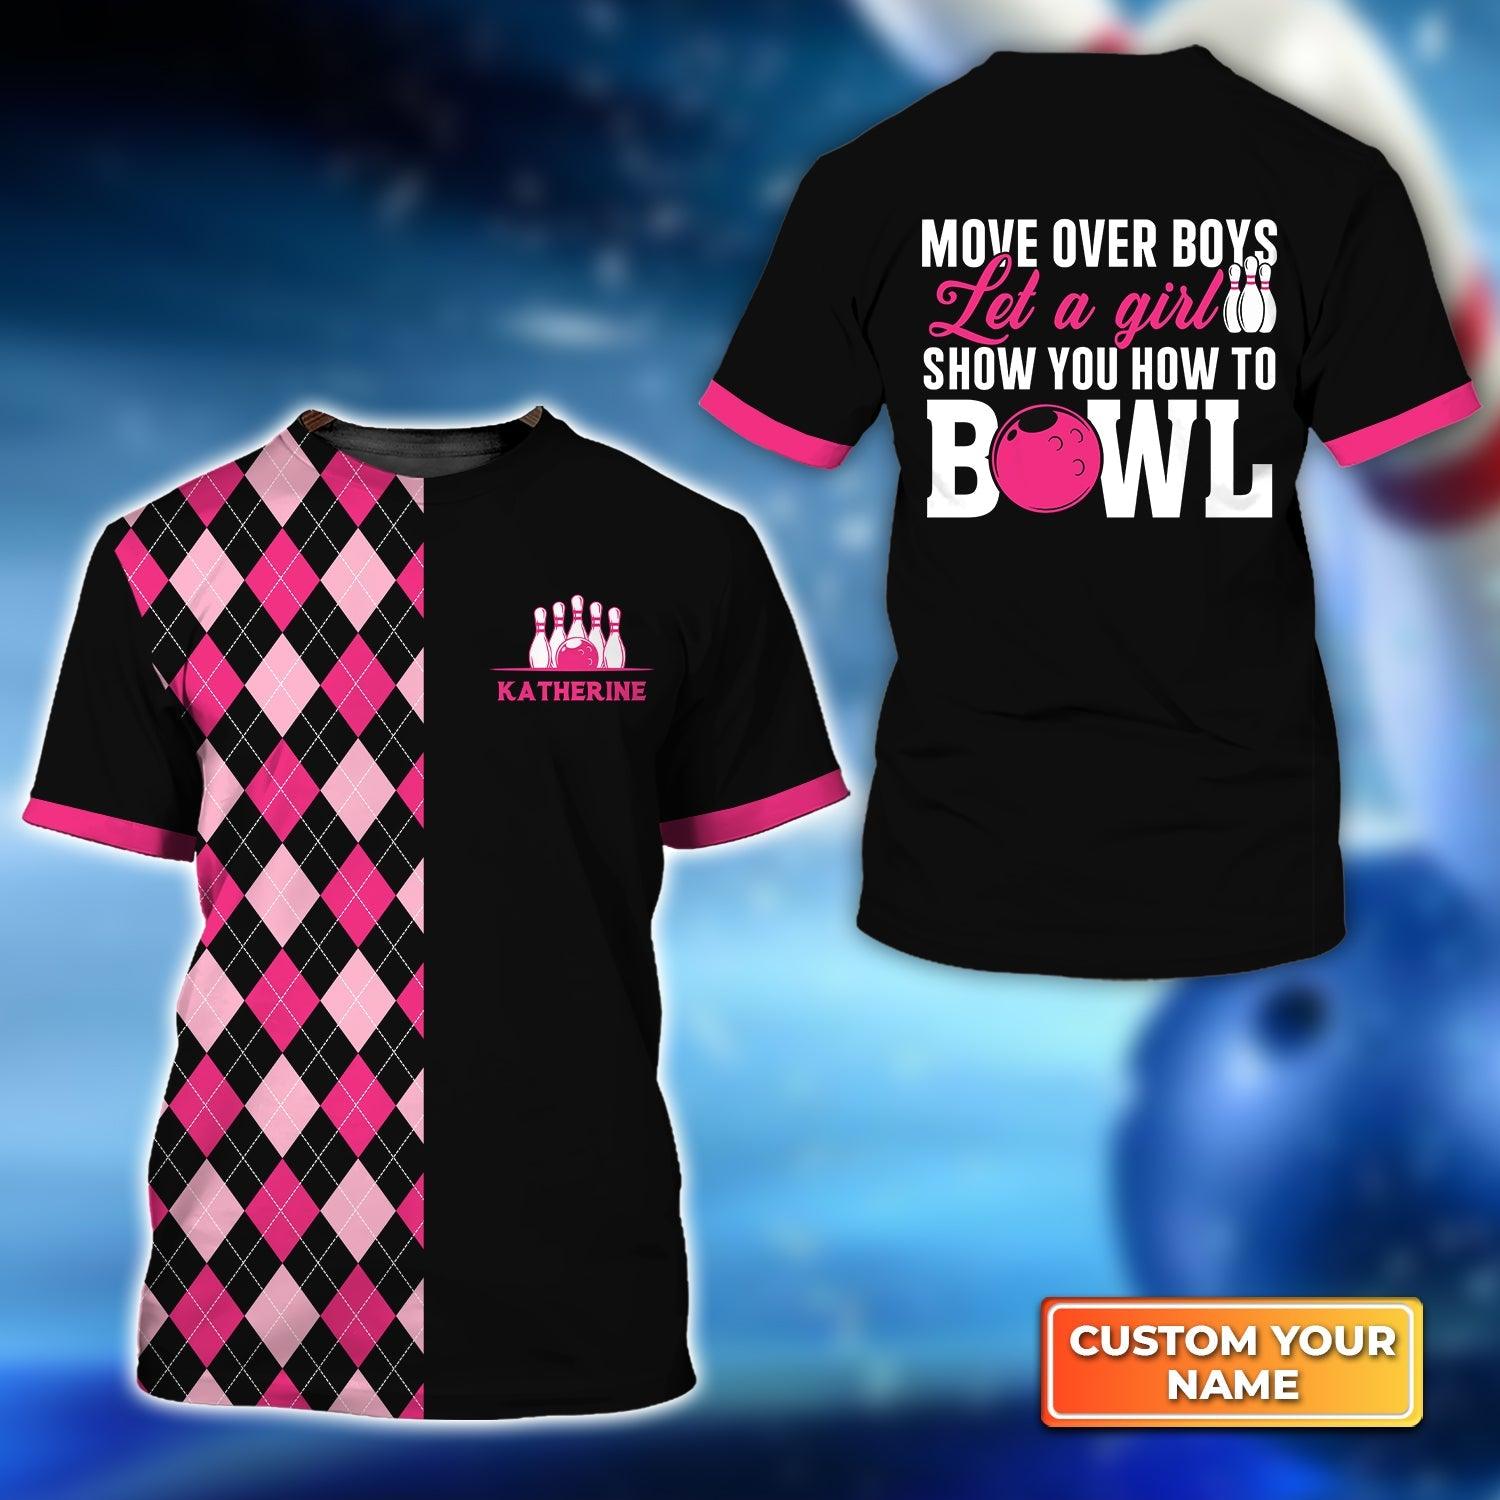 Bowling Custom Name T Shirt, Move Over Boys Let A Girl Show You How to Bowl Personalized T-Shirt For Men, Gift For Bowling Lovers, Bowlers, Team - Amzanimalsgift